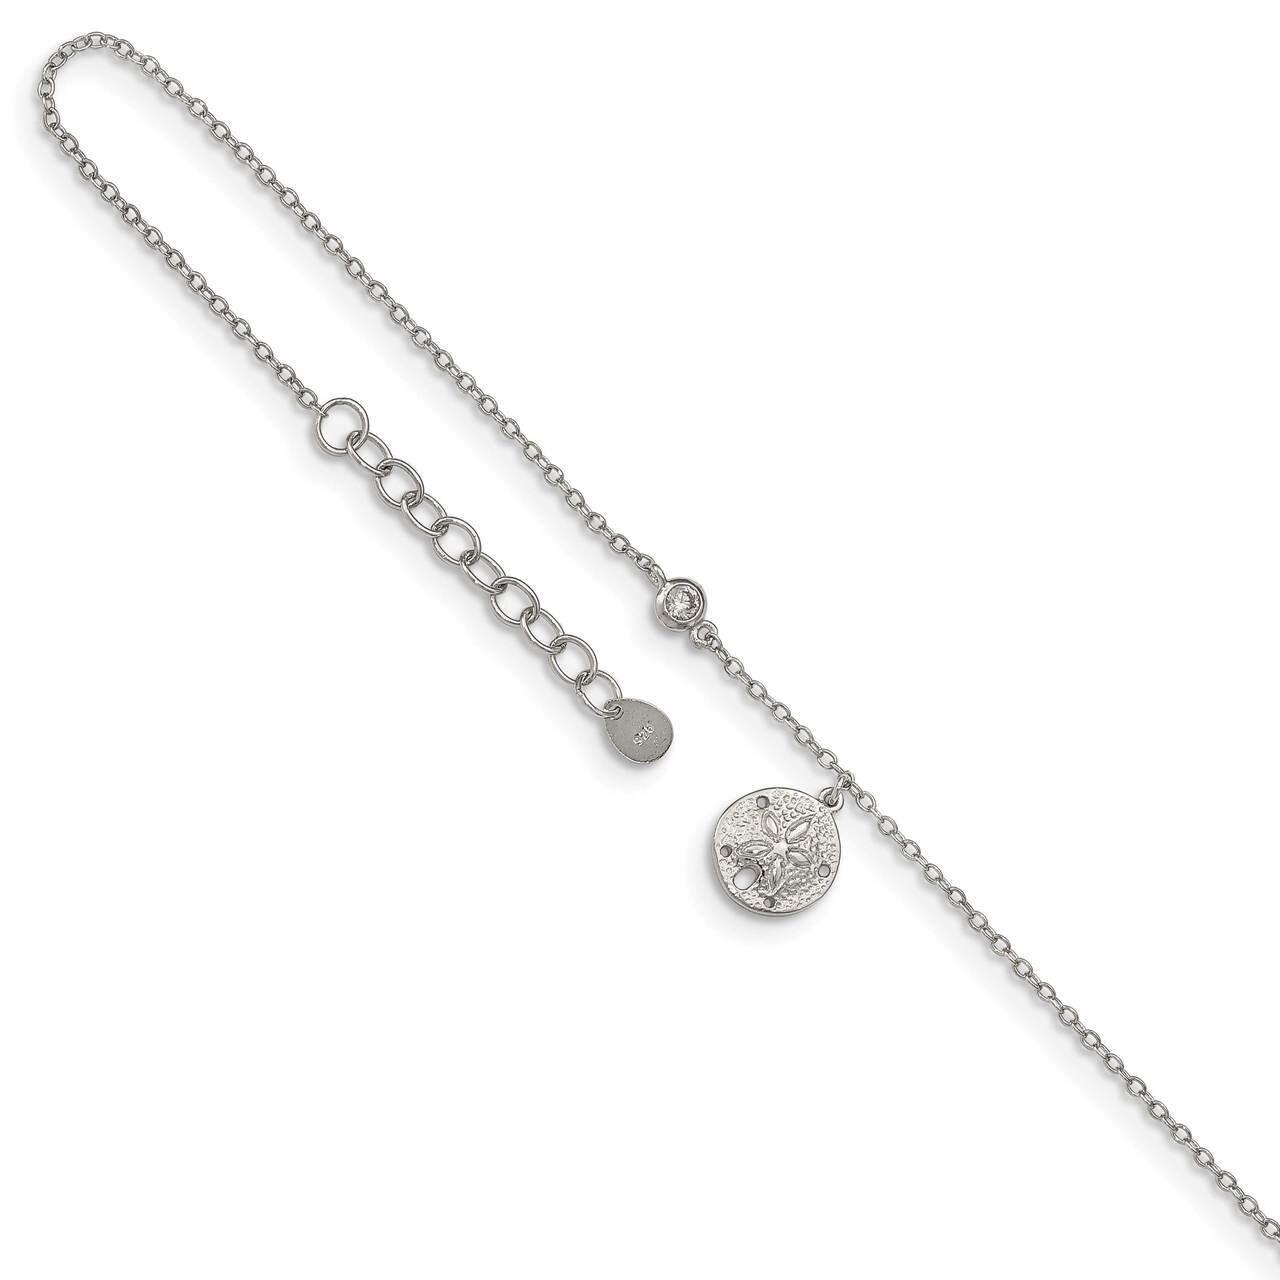 SDollar with 1 inch Extender Anklet Sterling Silver Rhodium-plated CZ Diamond QG4747-9